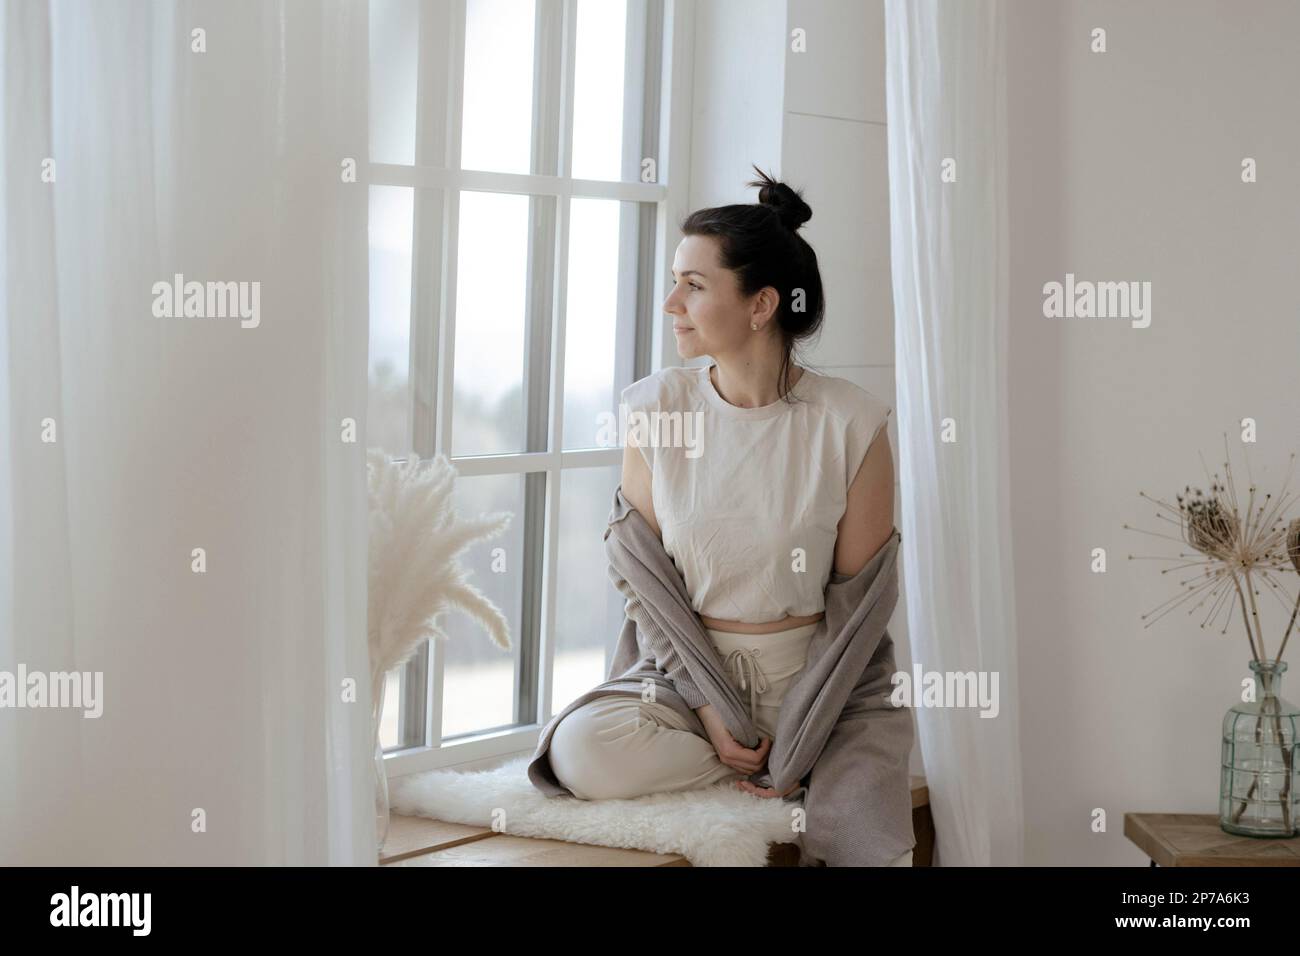 Dark-haired woman sits relaxed at the window Stock Photo